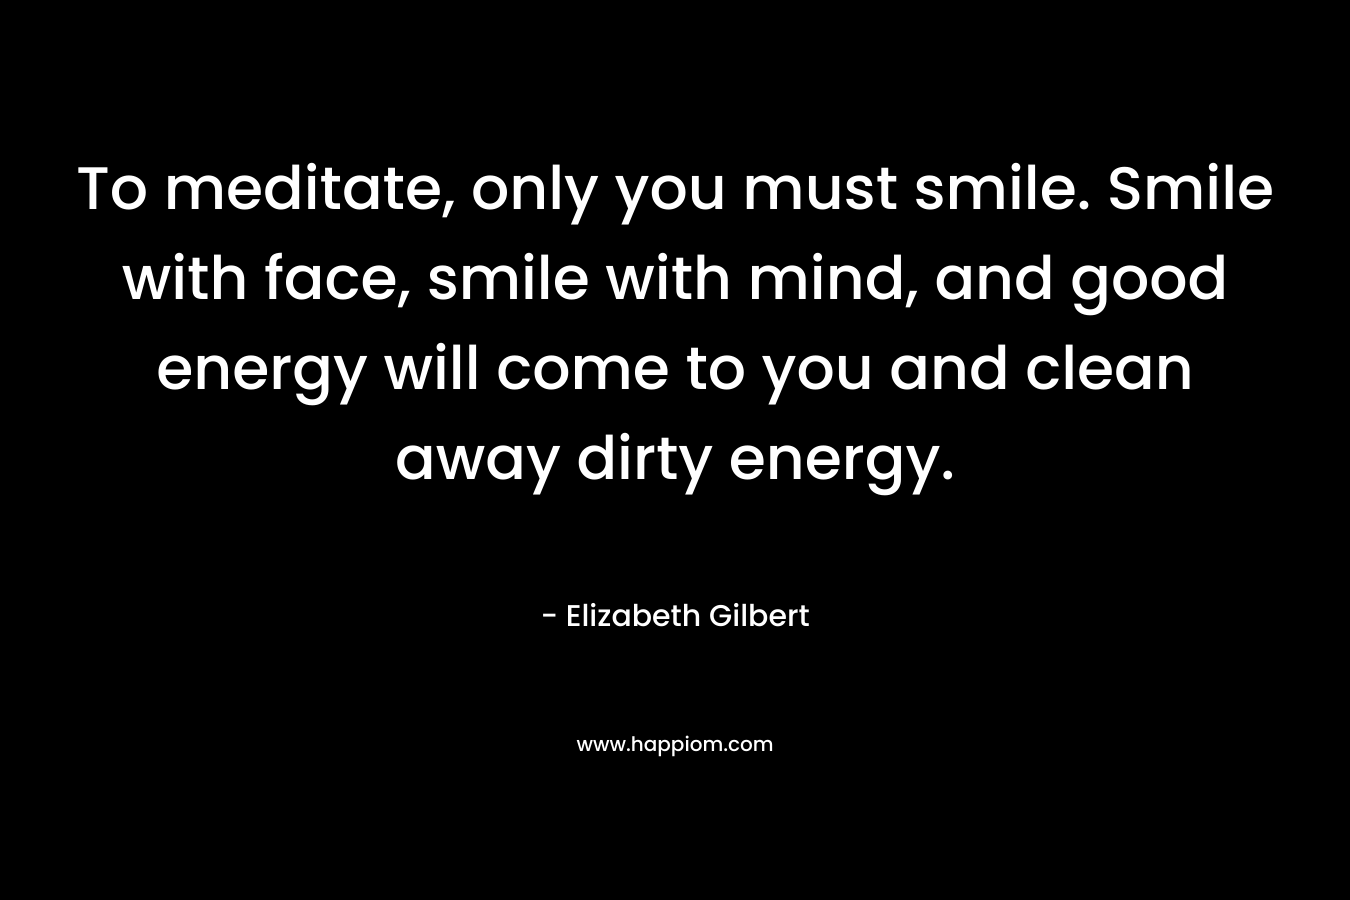 To meditate, only you must smile. Smile with face, smile with mind, and good energy will come to you and clean away dirty energy.